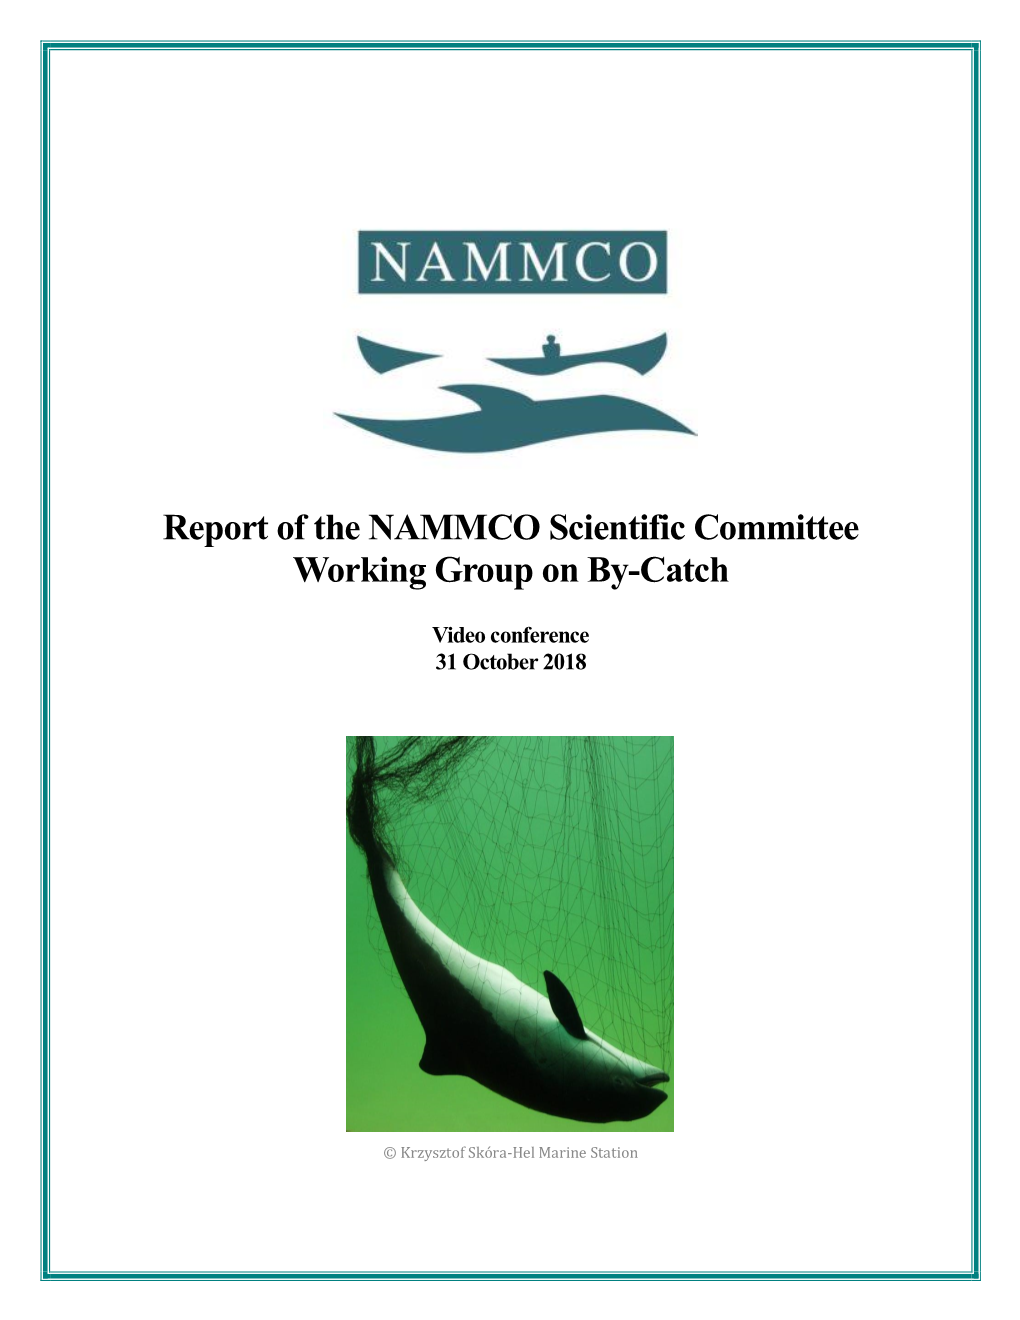 Report of the NAMMCO Scientific Committee Working Group on By-Catch